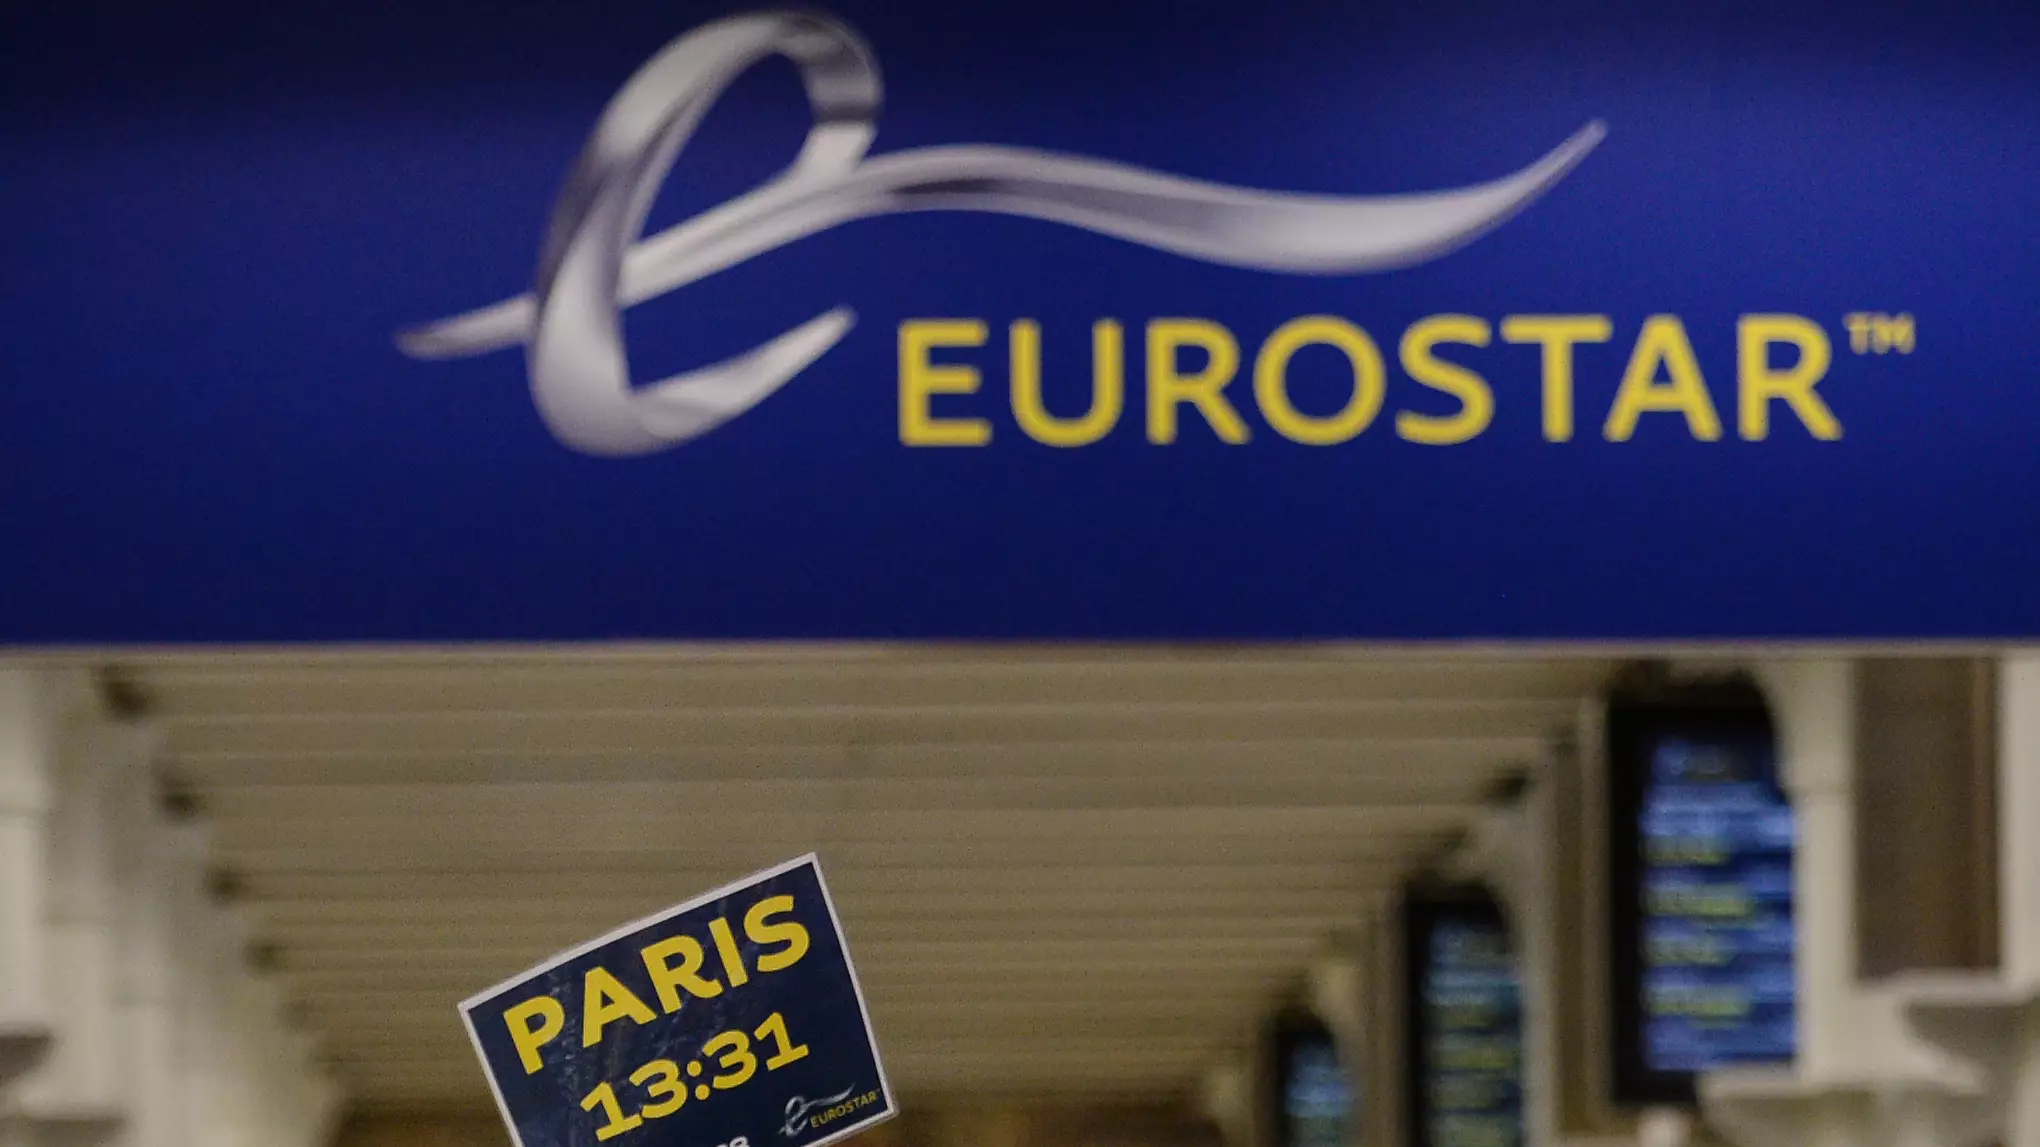 Eurostar Tickets To Amsterdam And Paris From £29 In Massive Sale